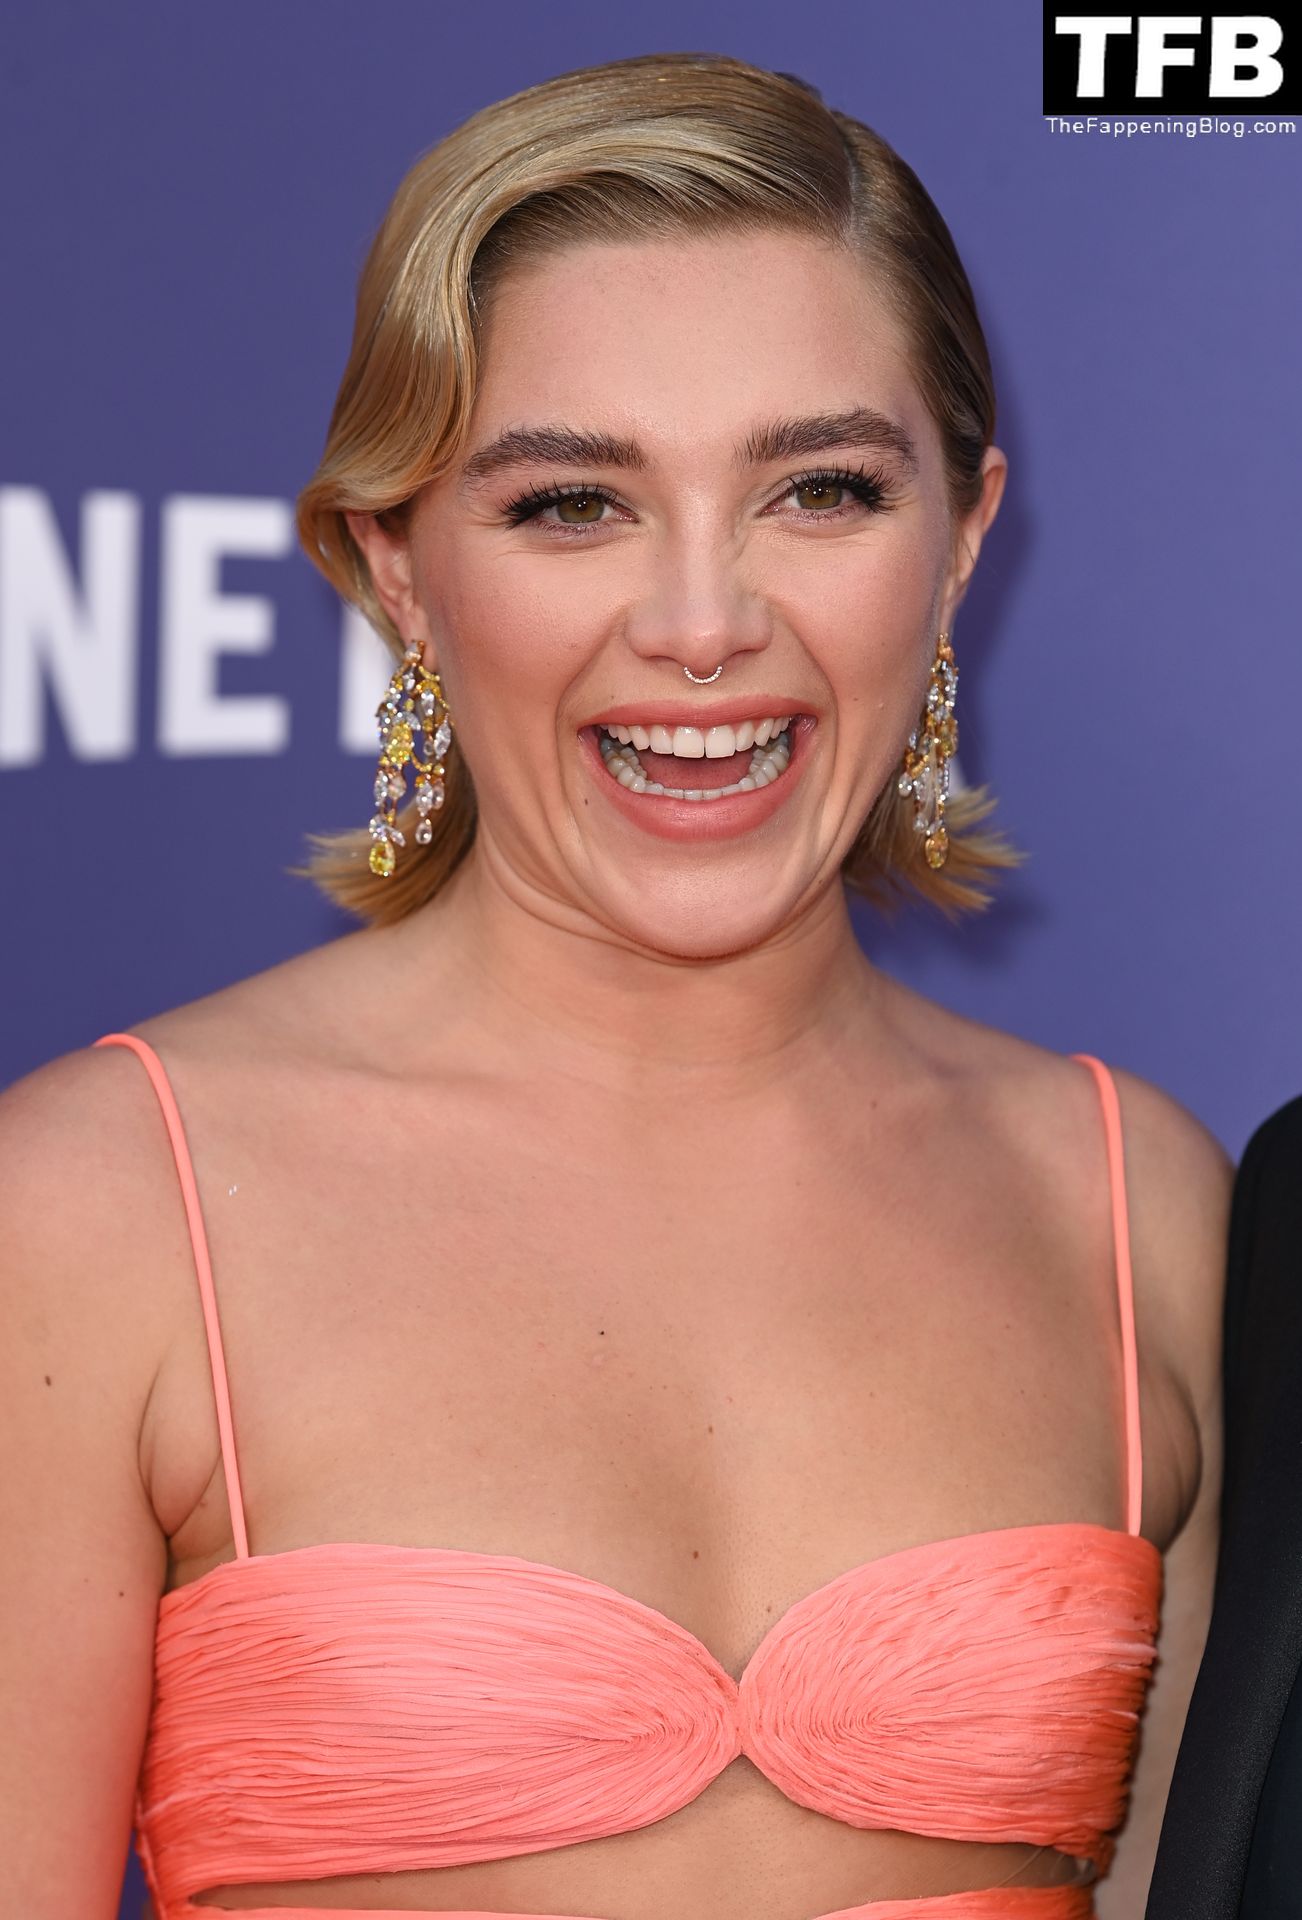 Florence-Pugh-Sexy-The-Fappening-Blog-61-1.jpg